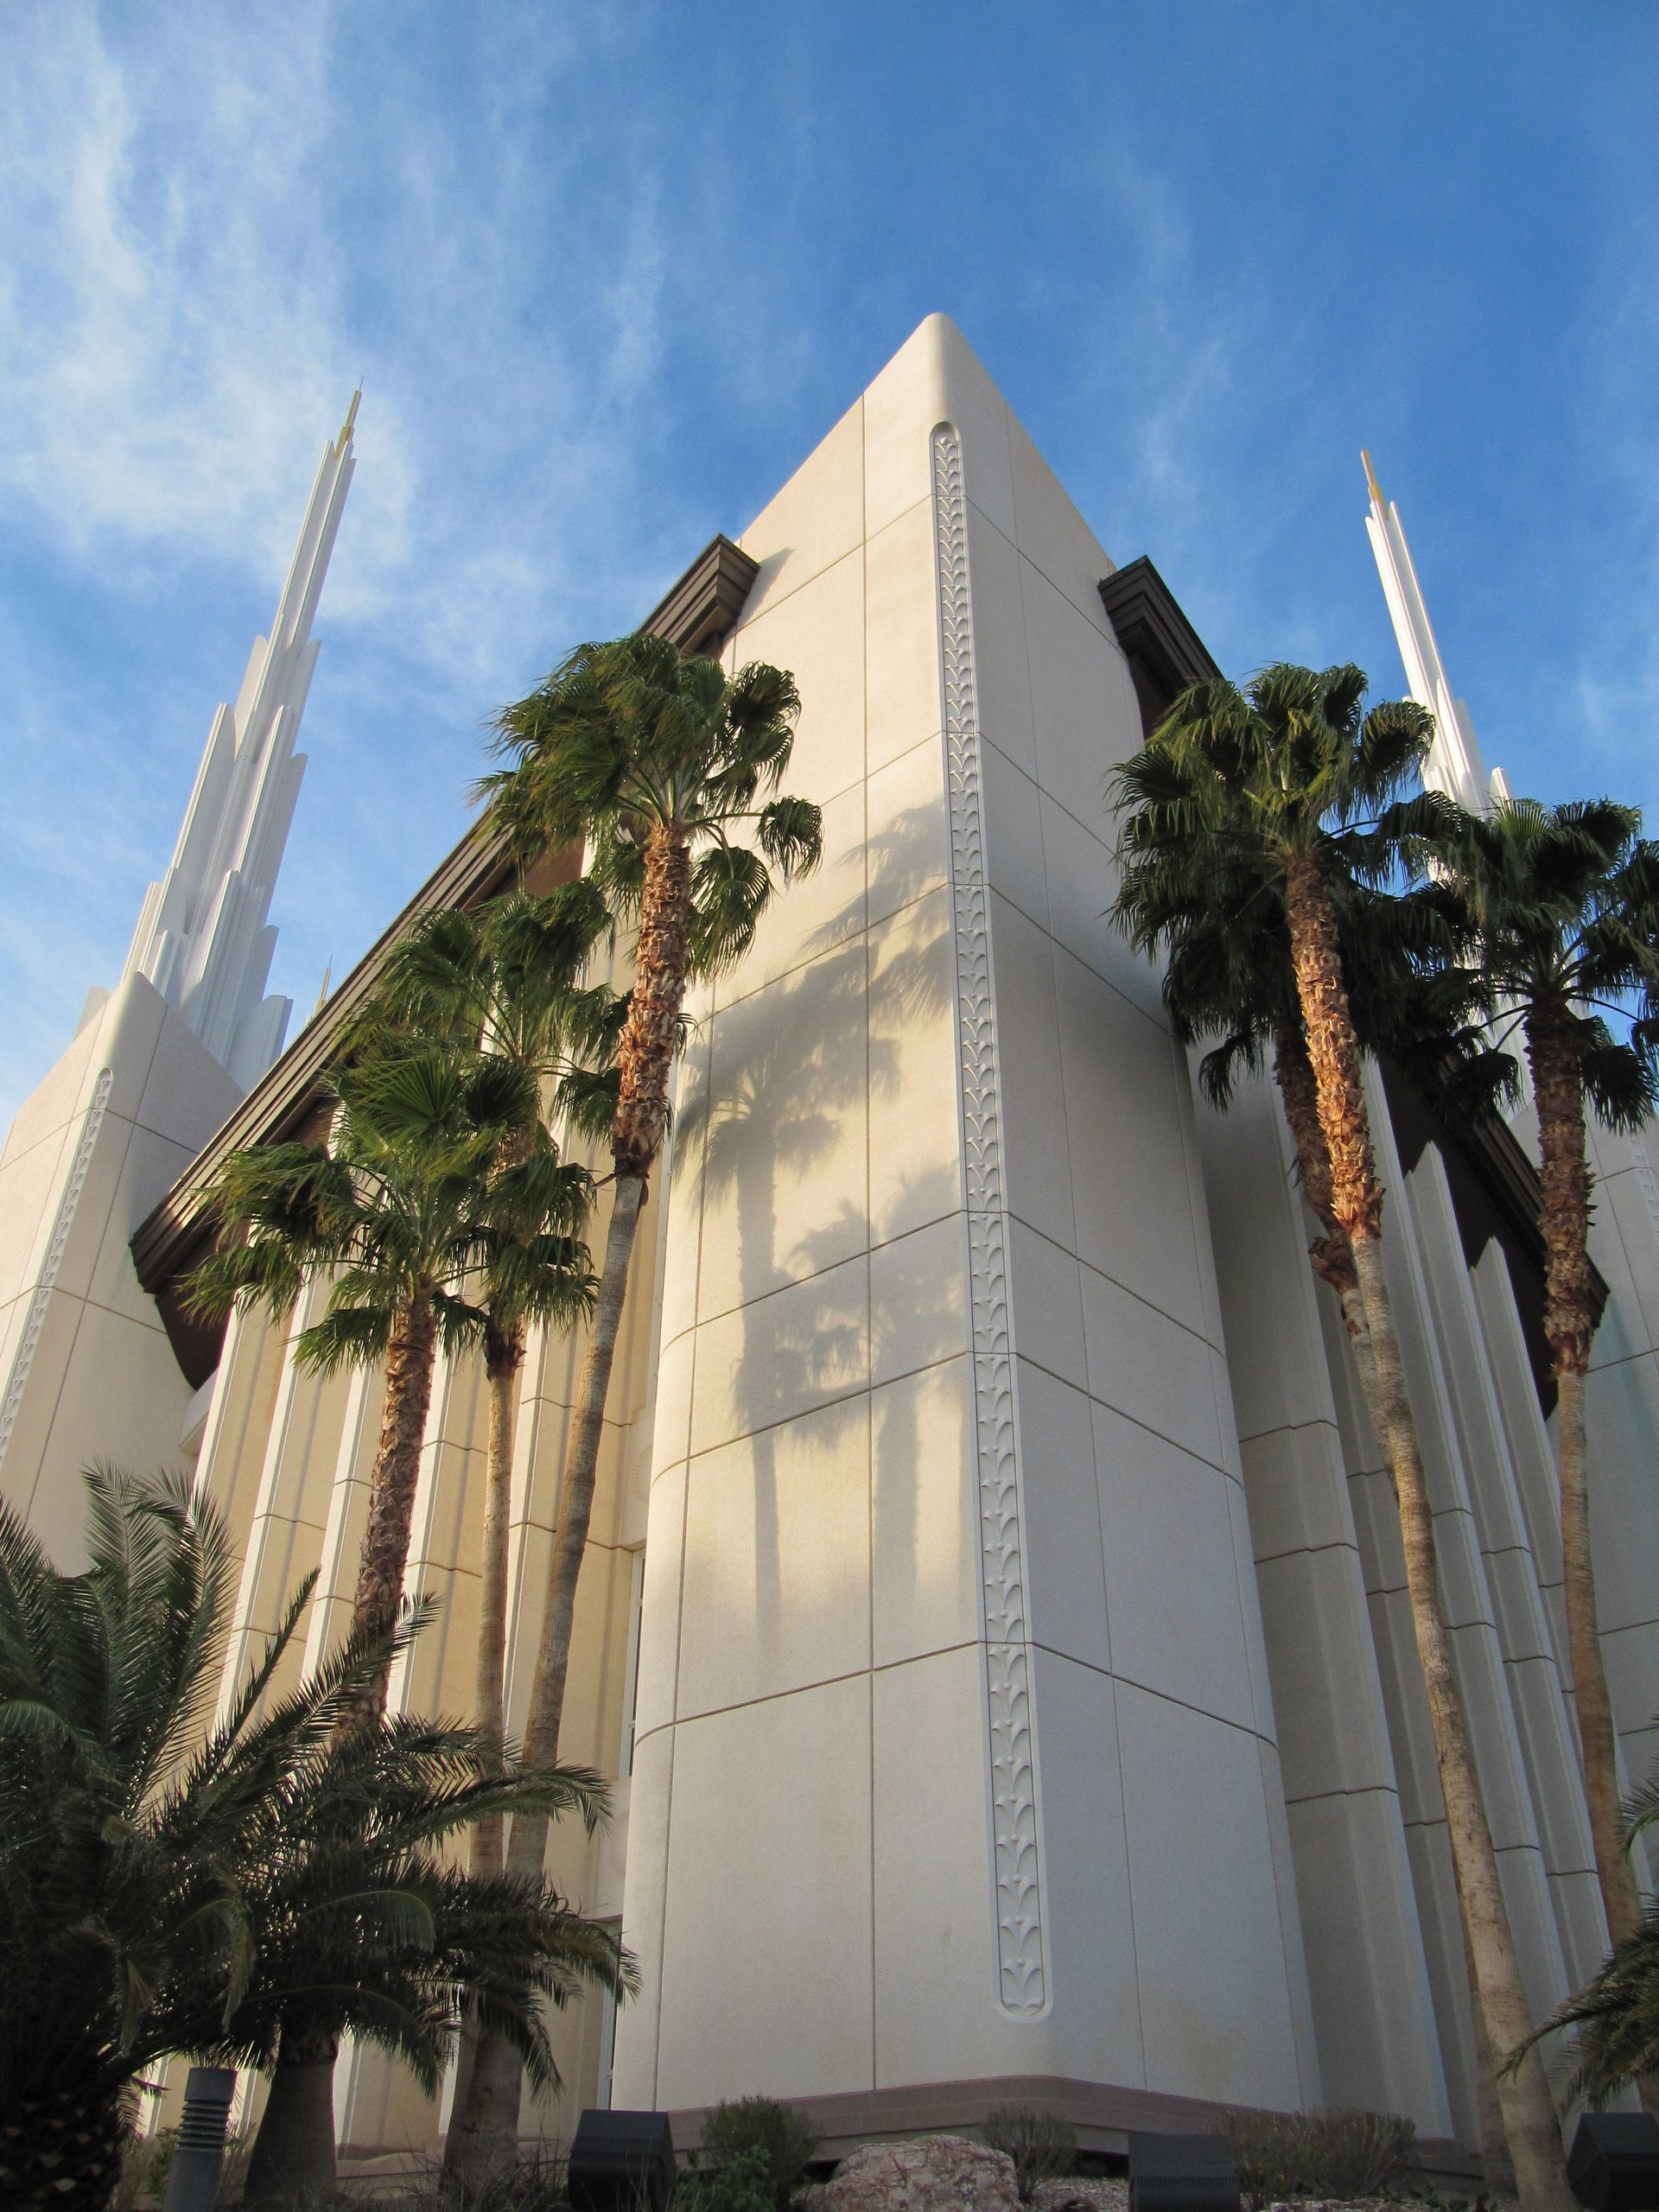 The front of the Las Vegas Nevada Temple, including scenery and spires.